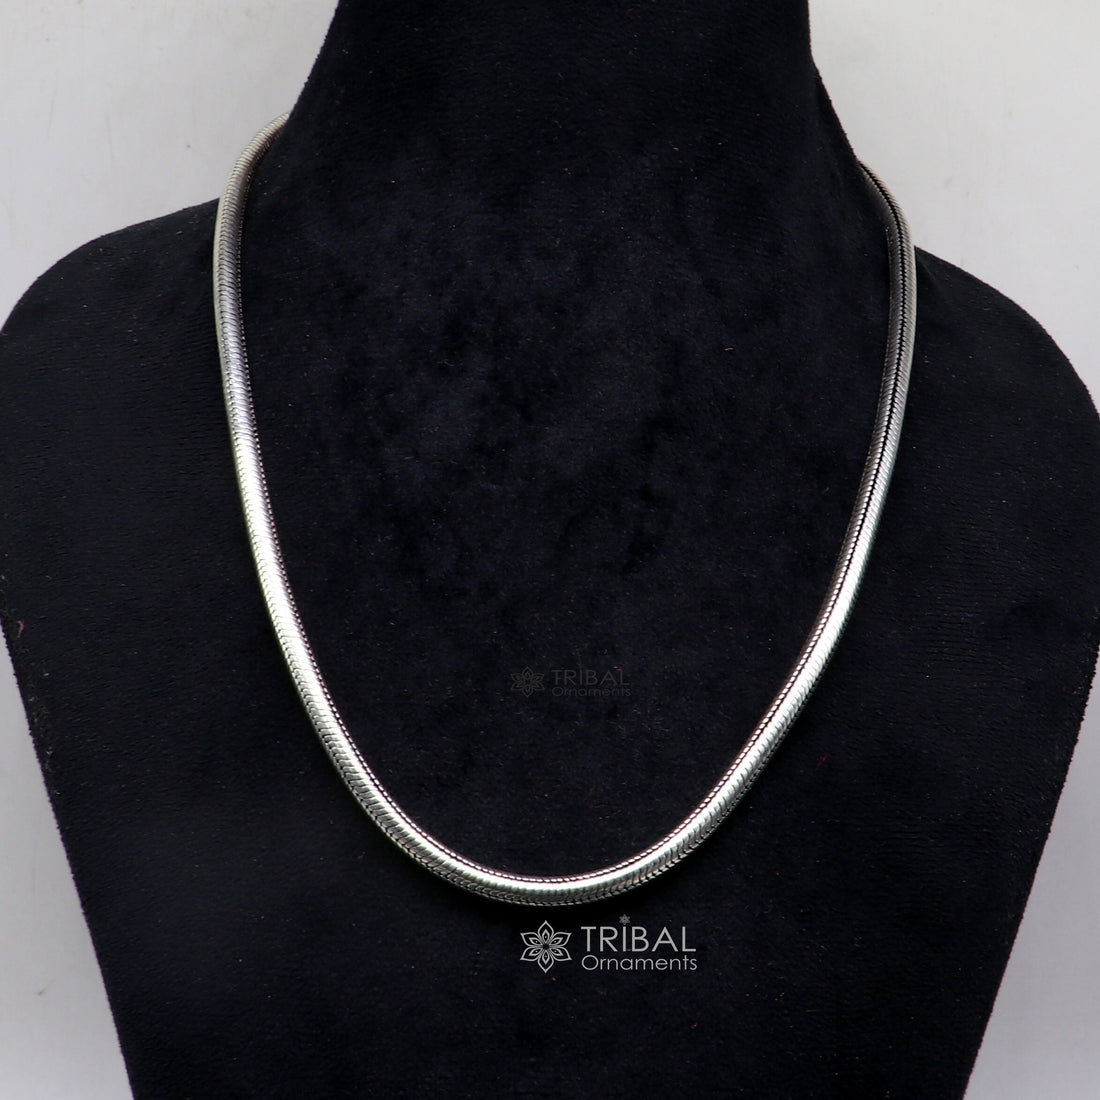 5mm solid 925 sterling silver handmade snake chain, pendant chain Amazing unique oxidized necklace vintage stylish heavy chain jewelry ch557 - TRIBAL ORNAMENTS